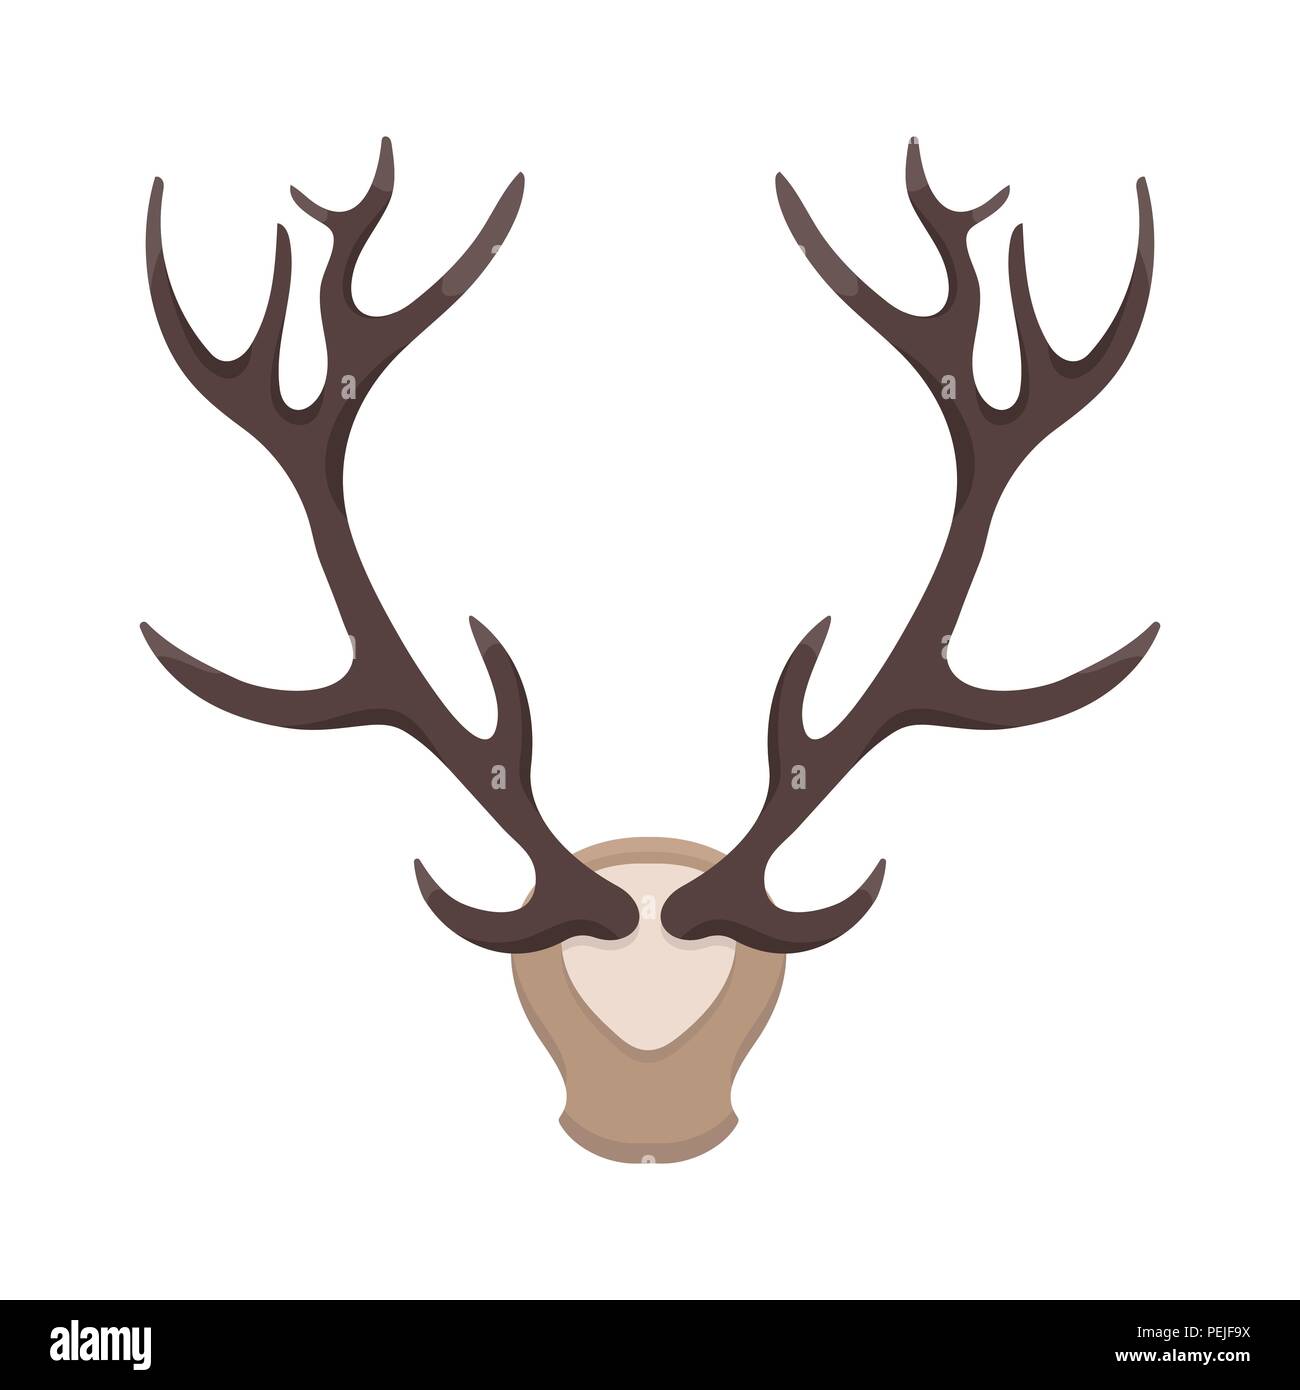 Deer antlers horns icon in cartoon style isolated on white background ...